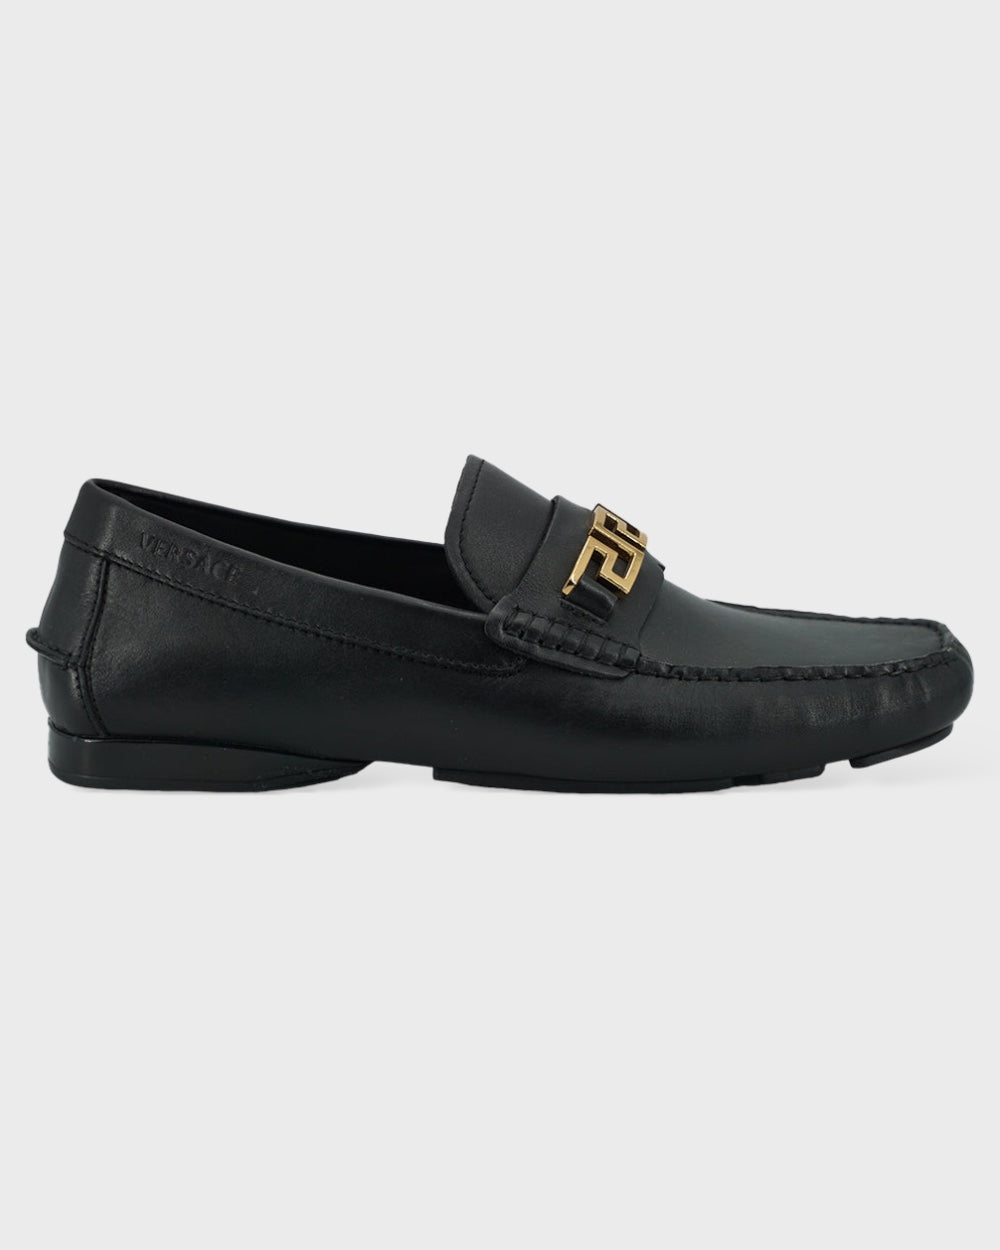 Versace Black Calf Leather Loafers Shoes